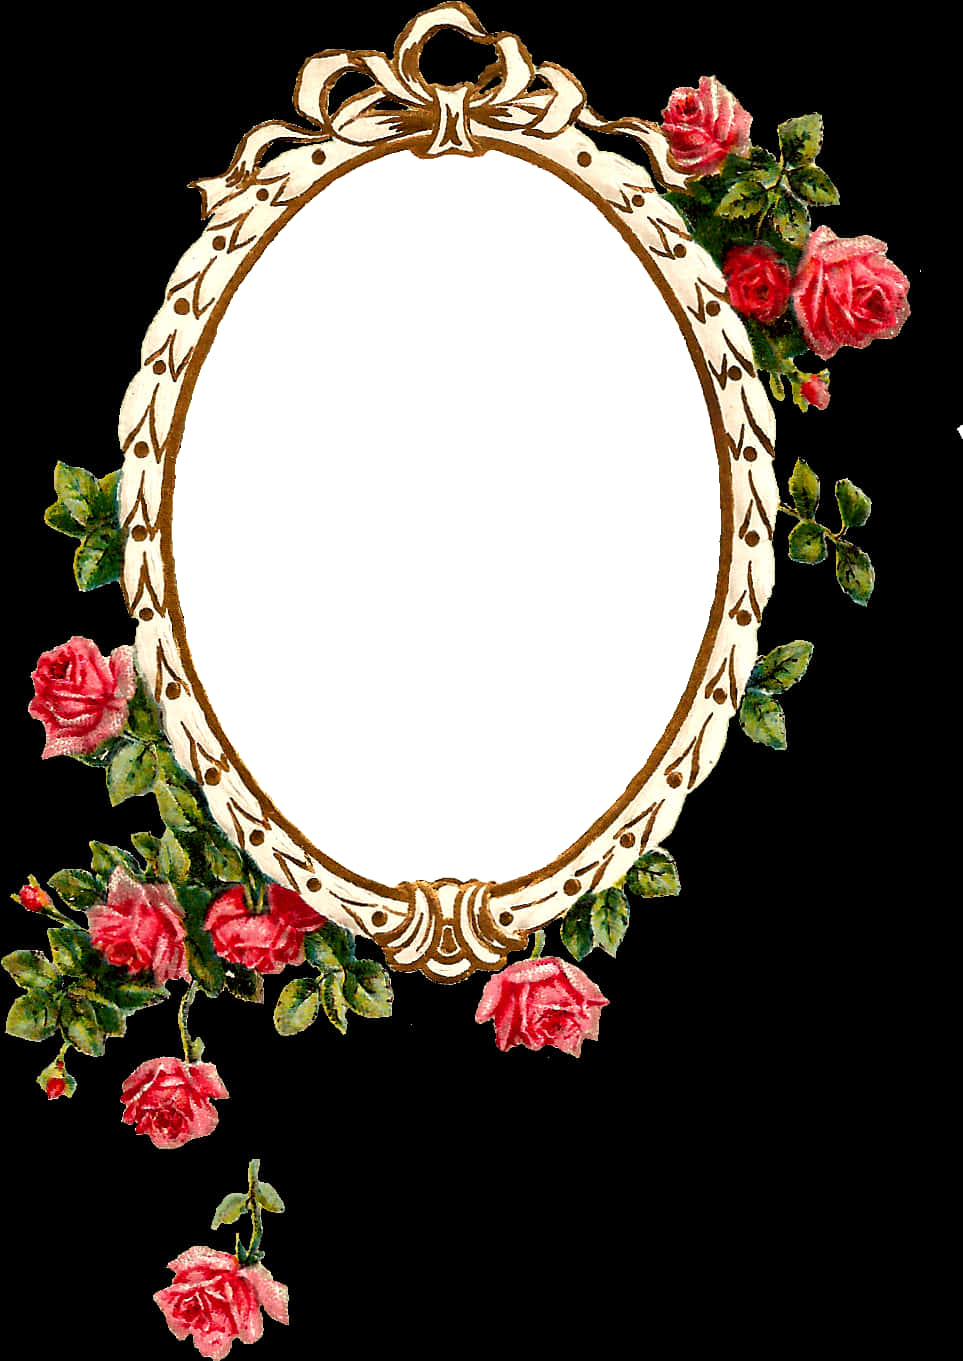 A Oval Frame With Flowers On It